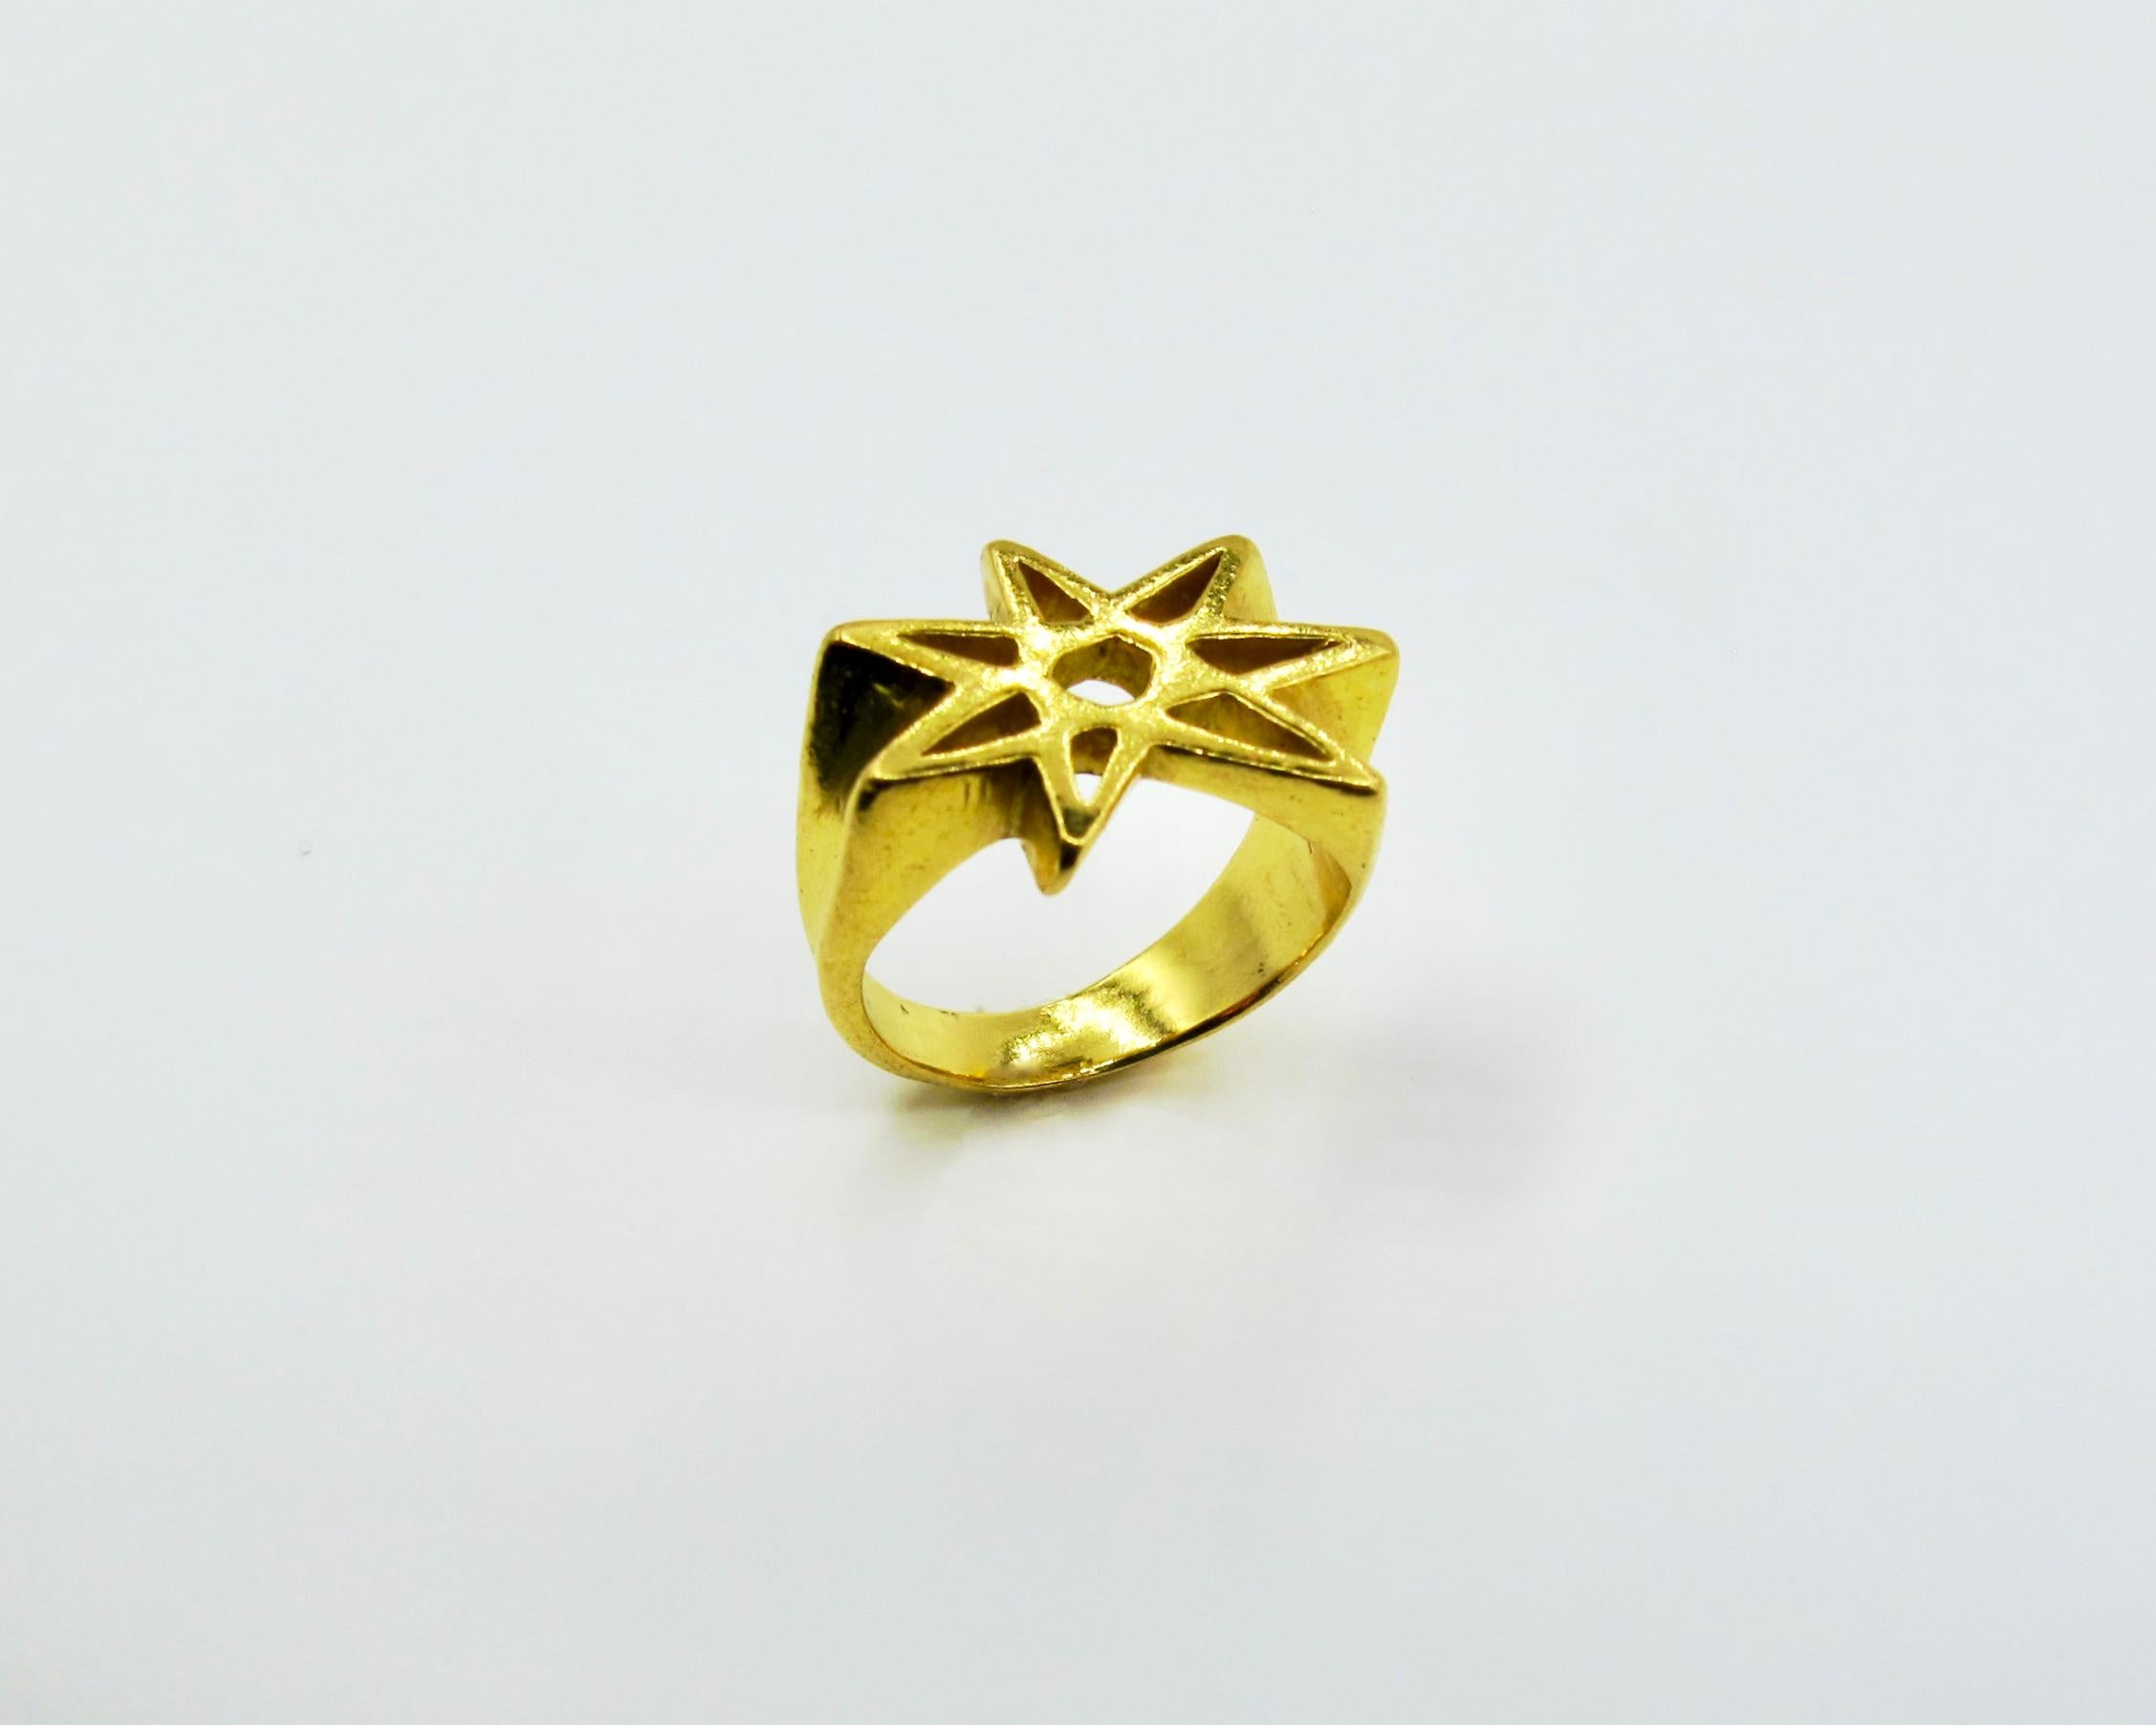 For Sale:  RIMA JEWELS 22k Gold Alchemical Seven Pointed Star Ring 2